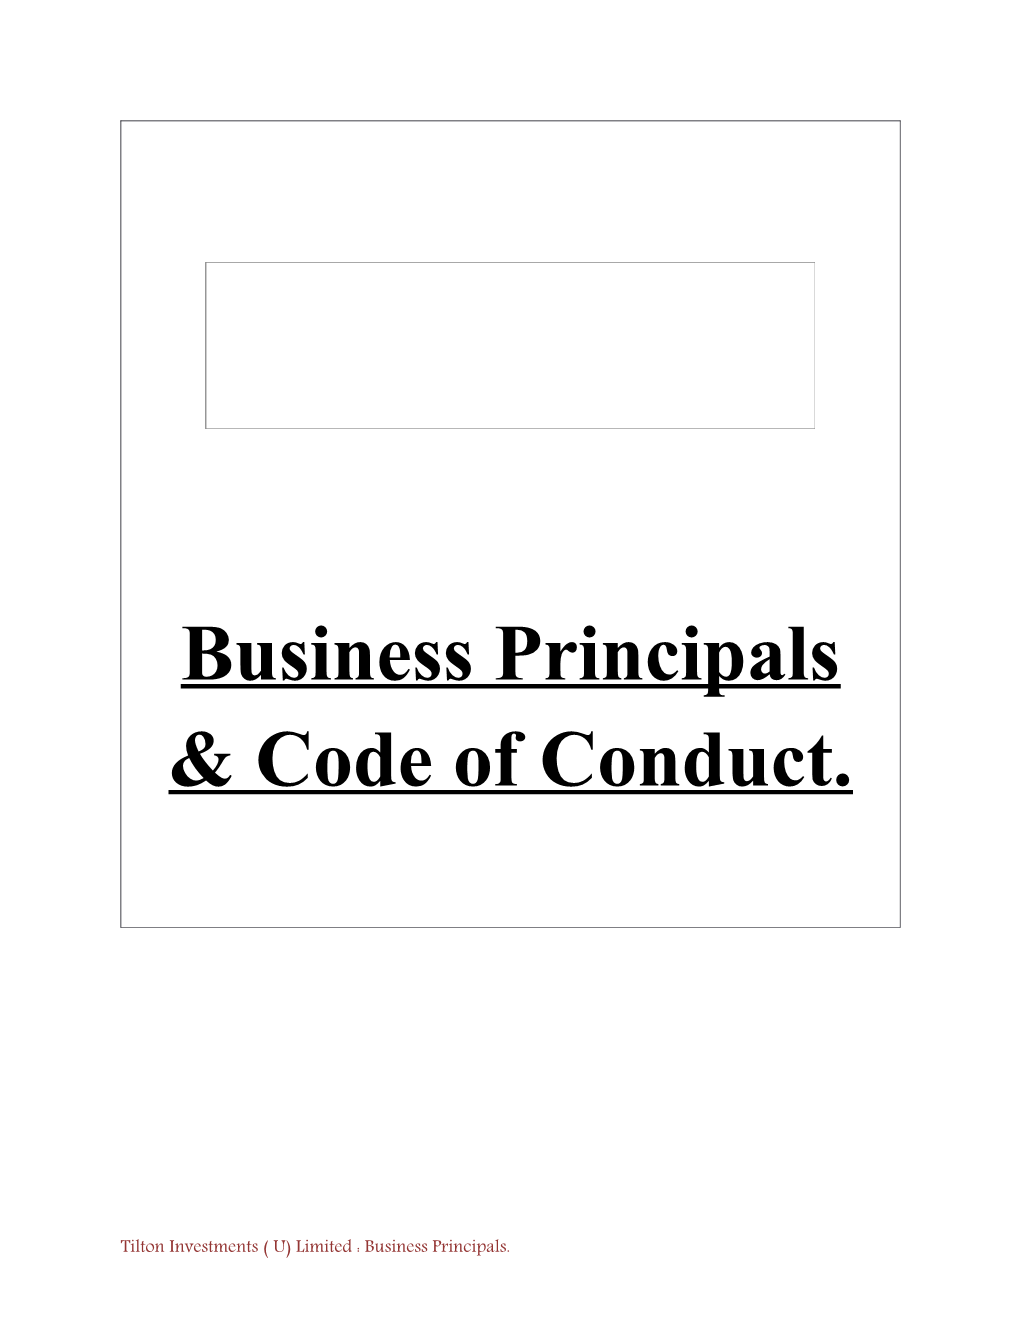 Business Principals & Code of Conduct